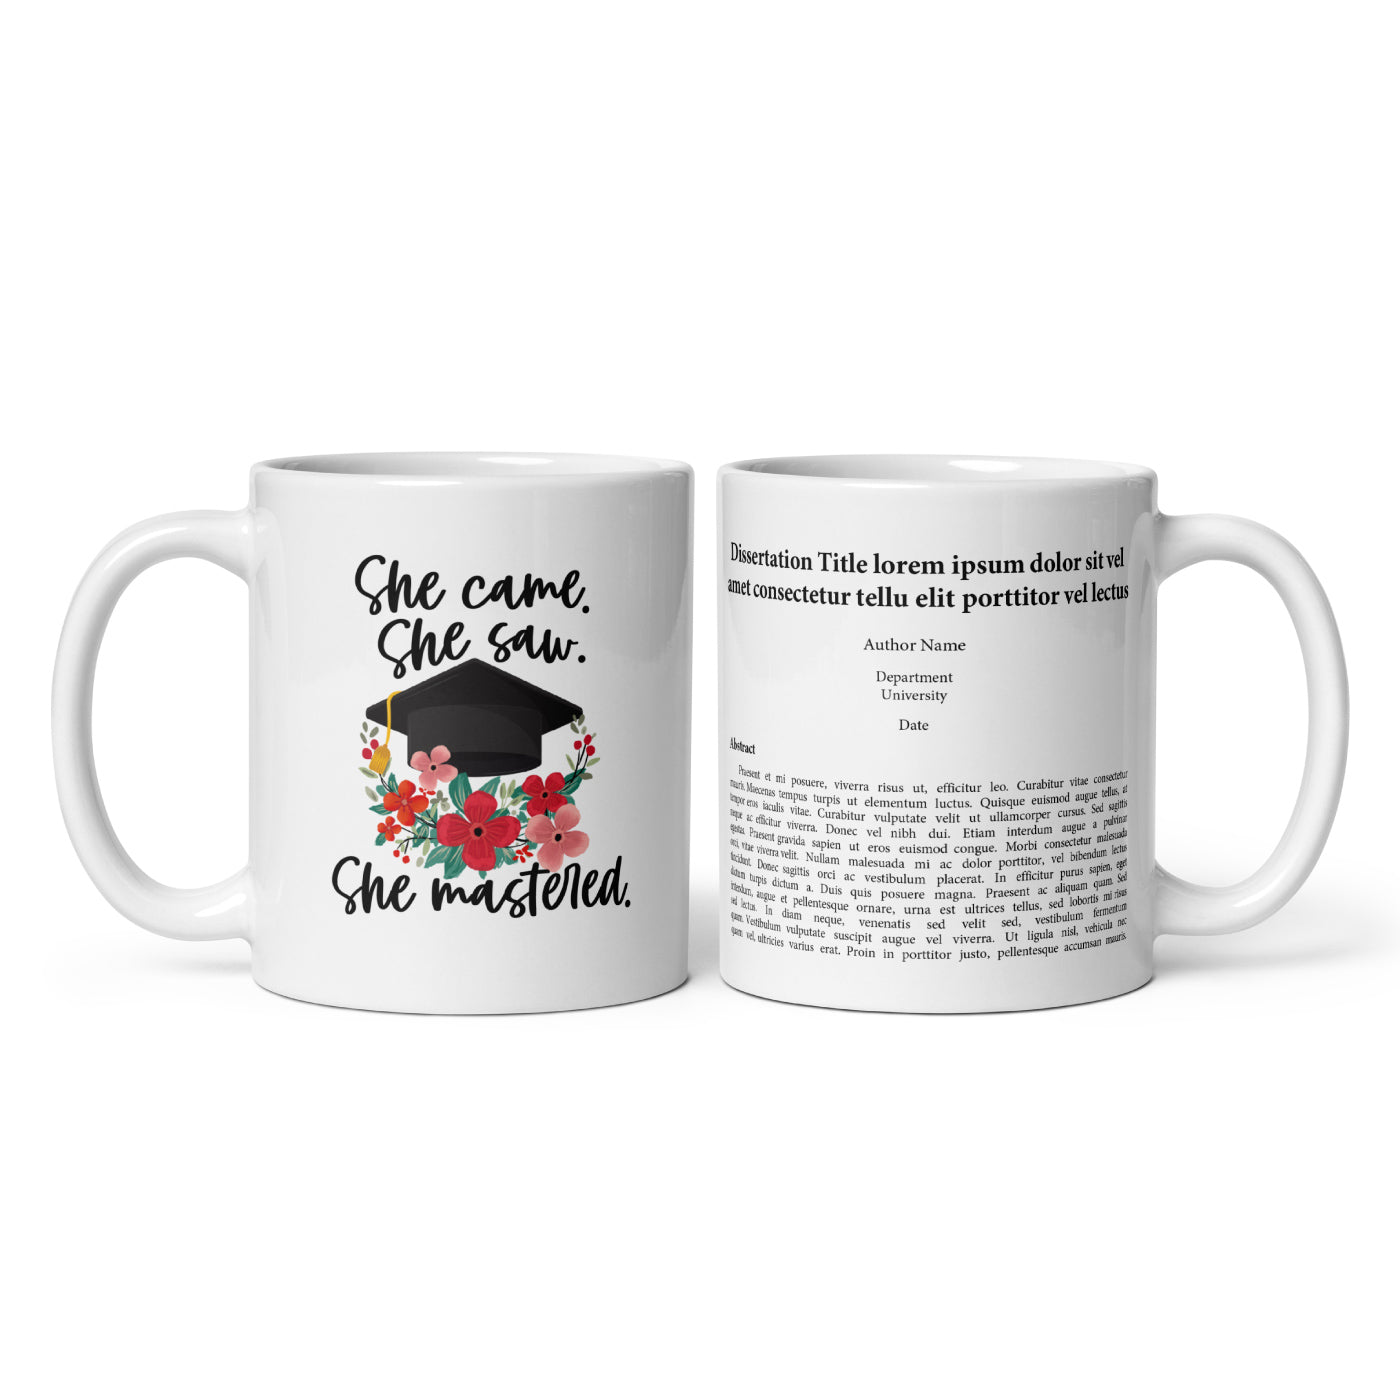 Graduation gift for her or him - master's thesis mug